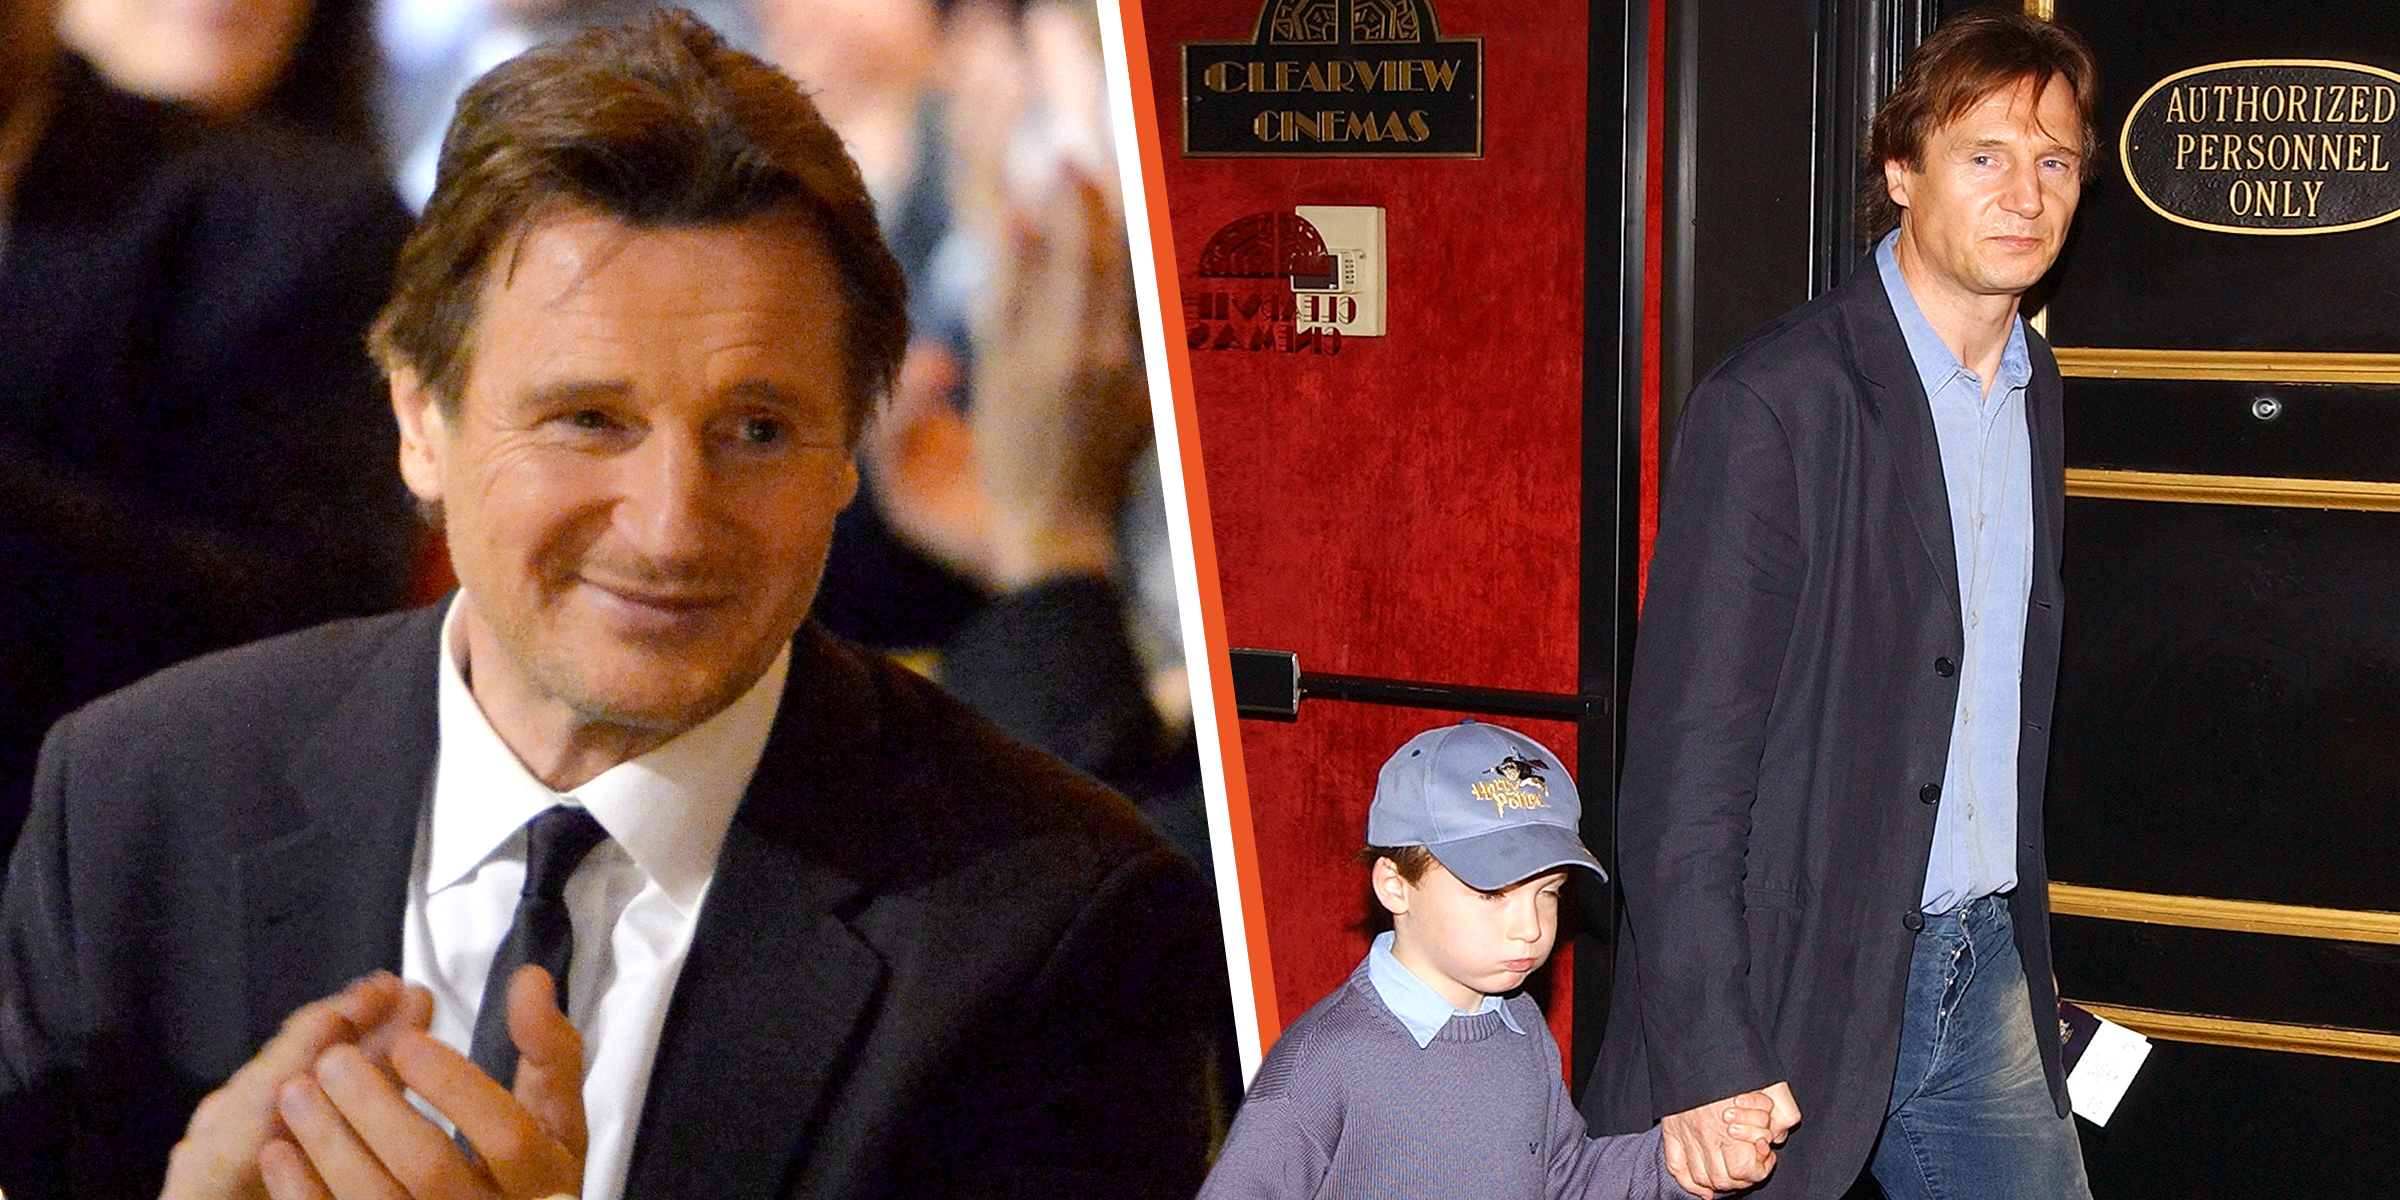 Liam Neeson, 2014 | Liam Neeson and One of His Sons, 2002 | Source: Getty Images